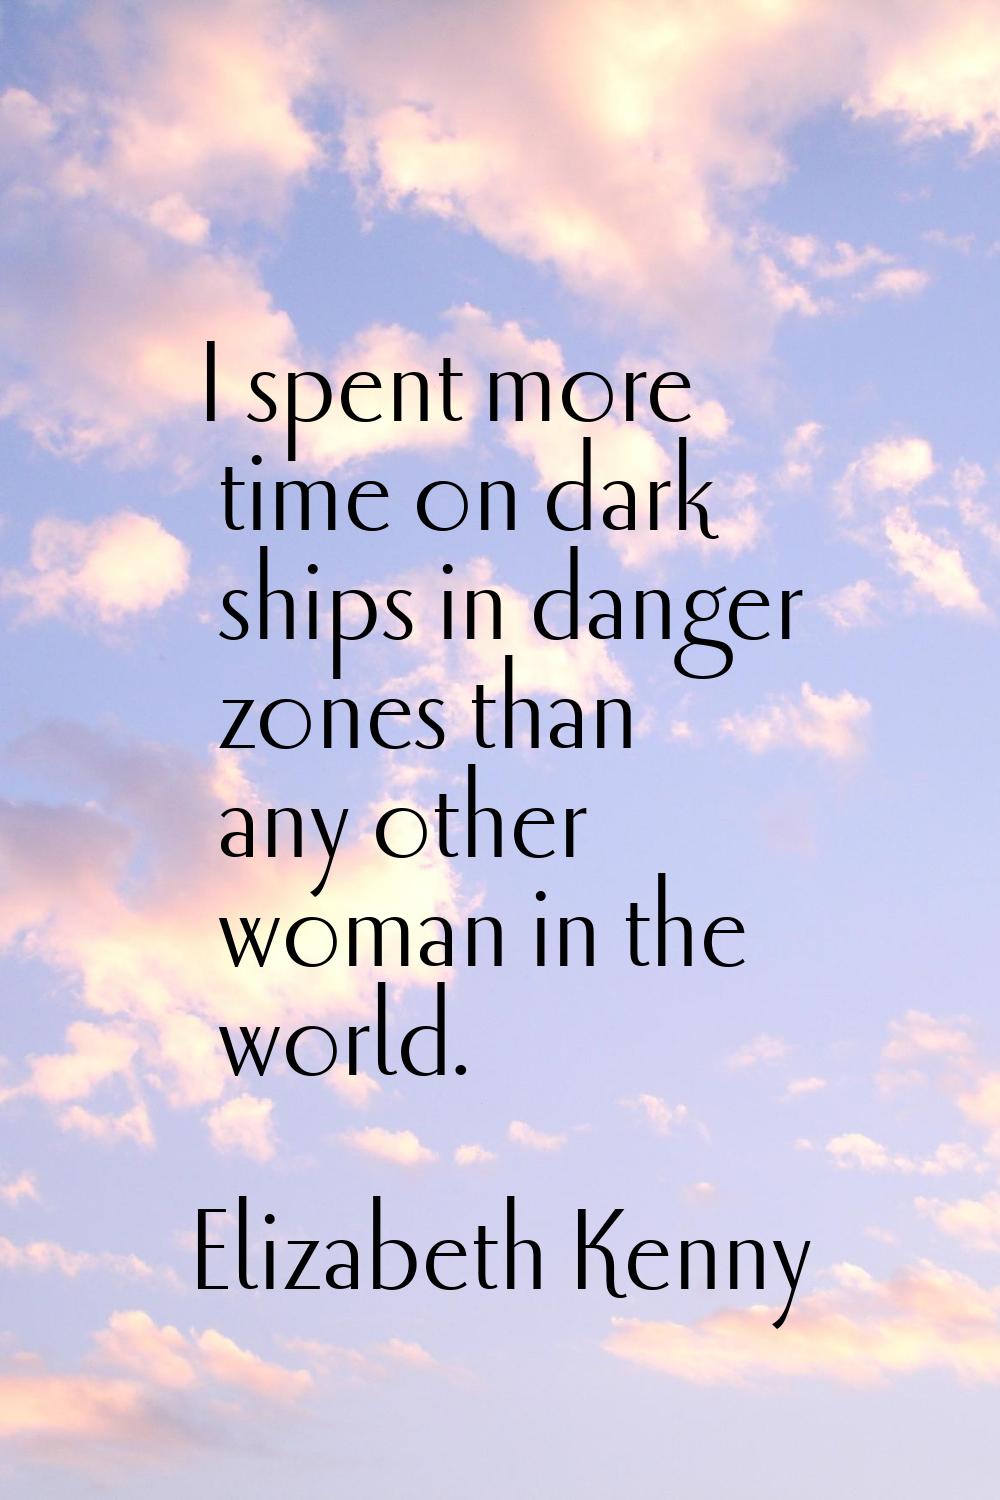 I spent more time on dark ships in danger zones than any other woman in the world.